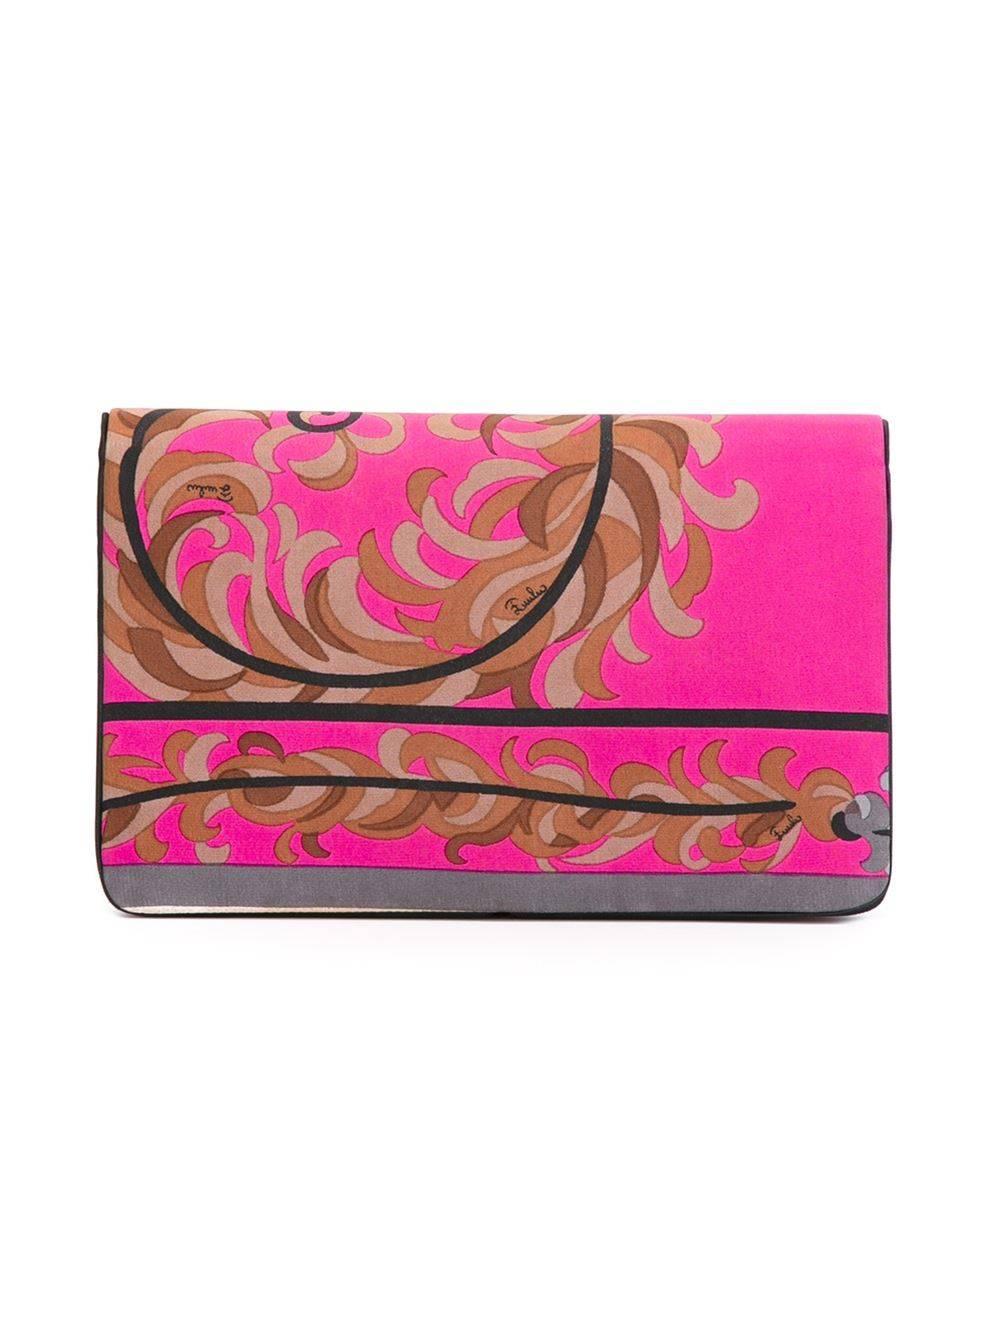 Just gorgeous and collectable Emilio Pucci silk flowers clutch. In excellent vintage condition. Size: 20 x 12 x 3 cm. 